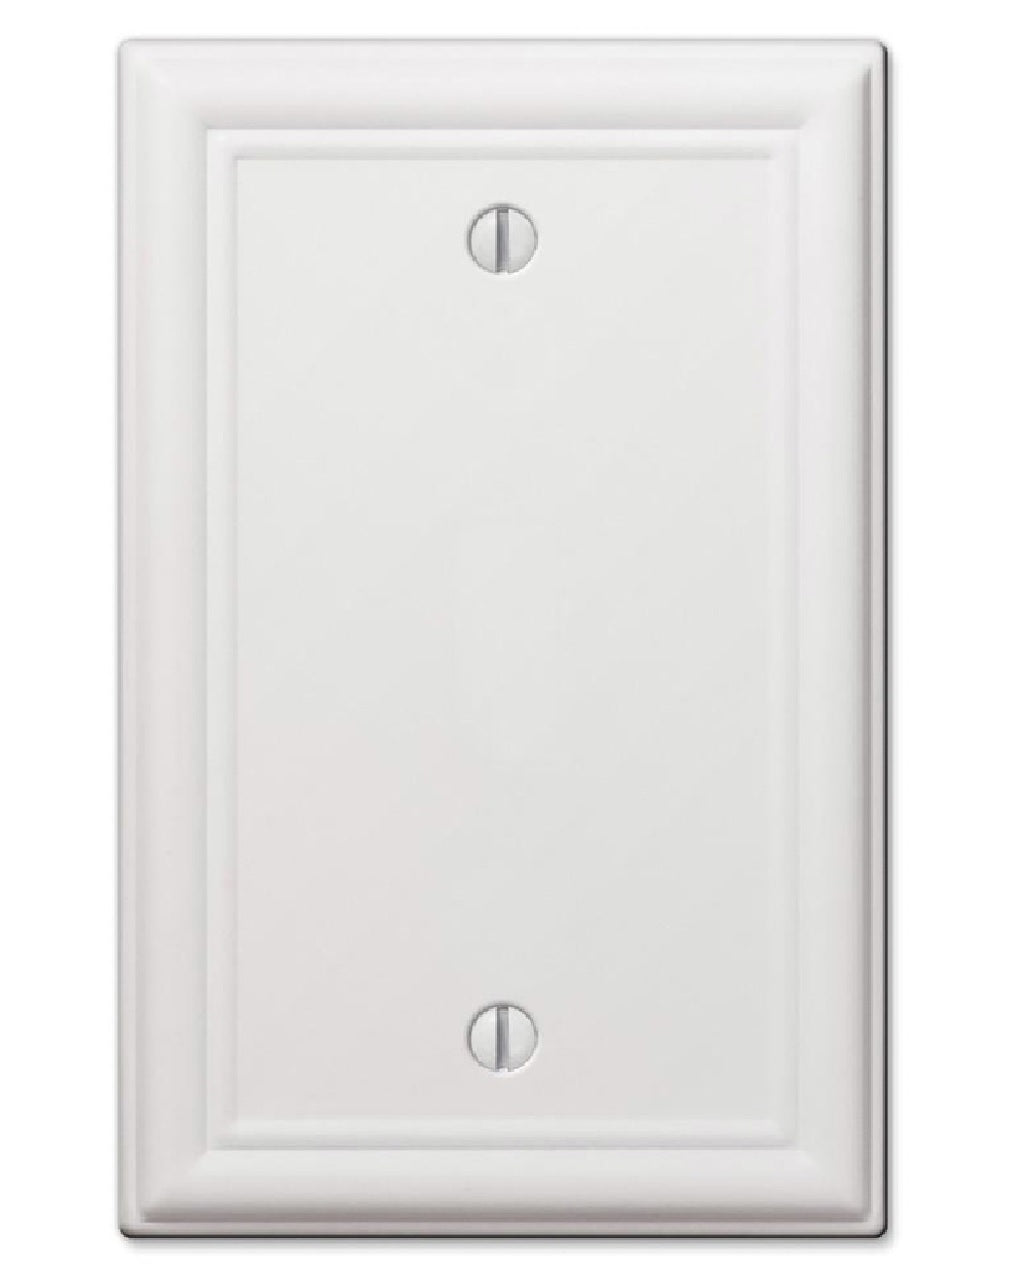 Amerelle 149BW Blank Wall Plate, Stamped Steel, White